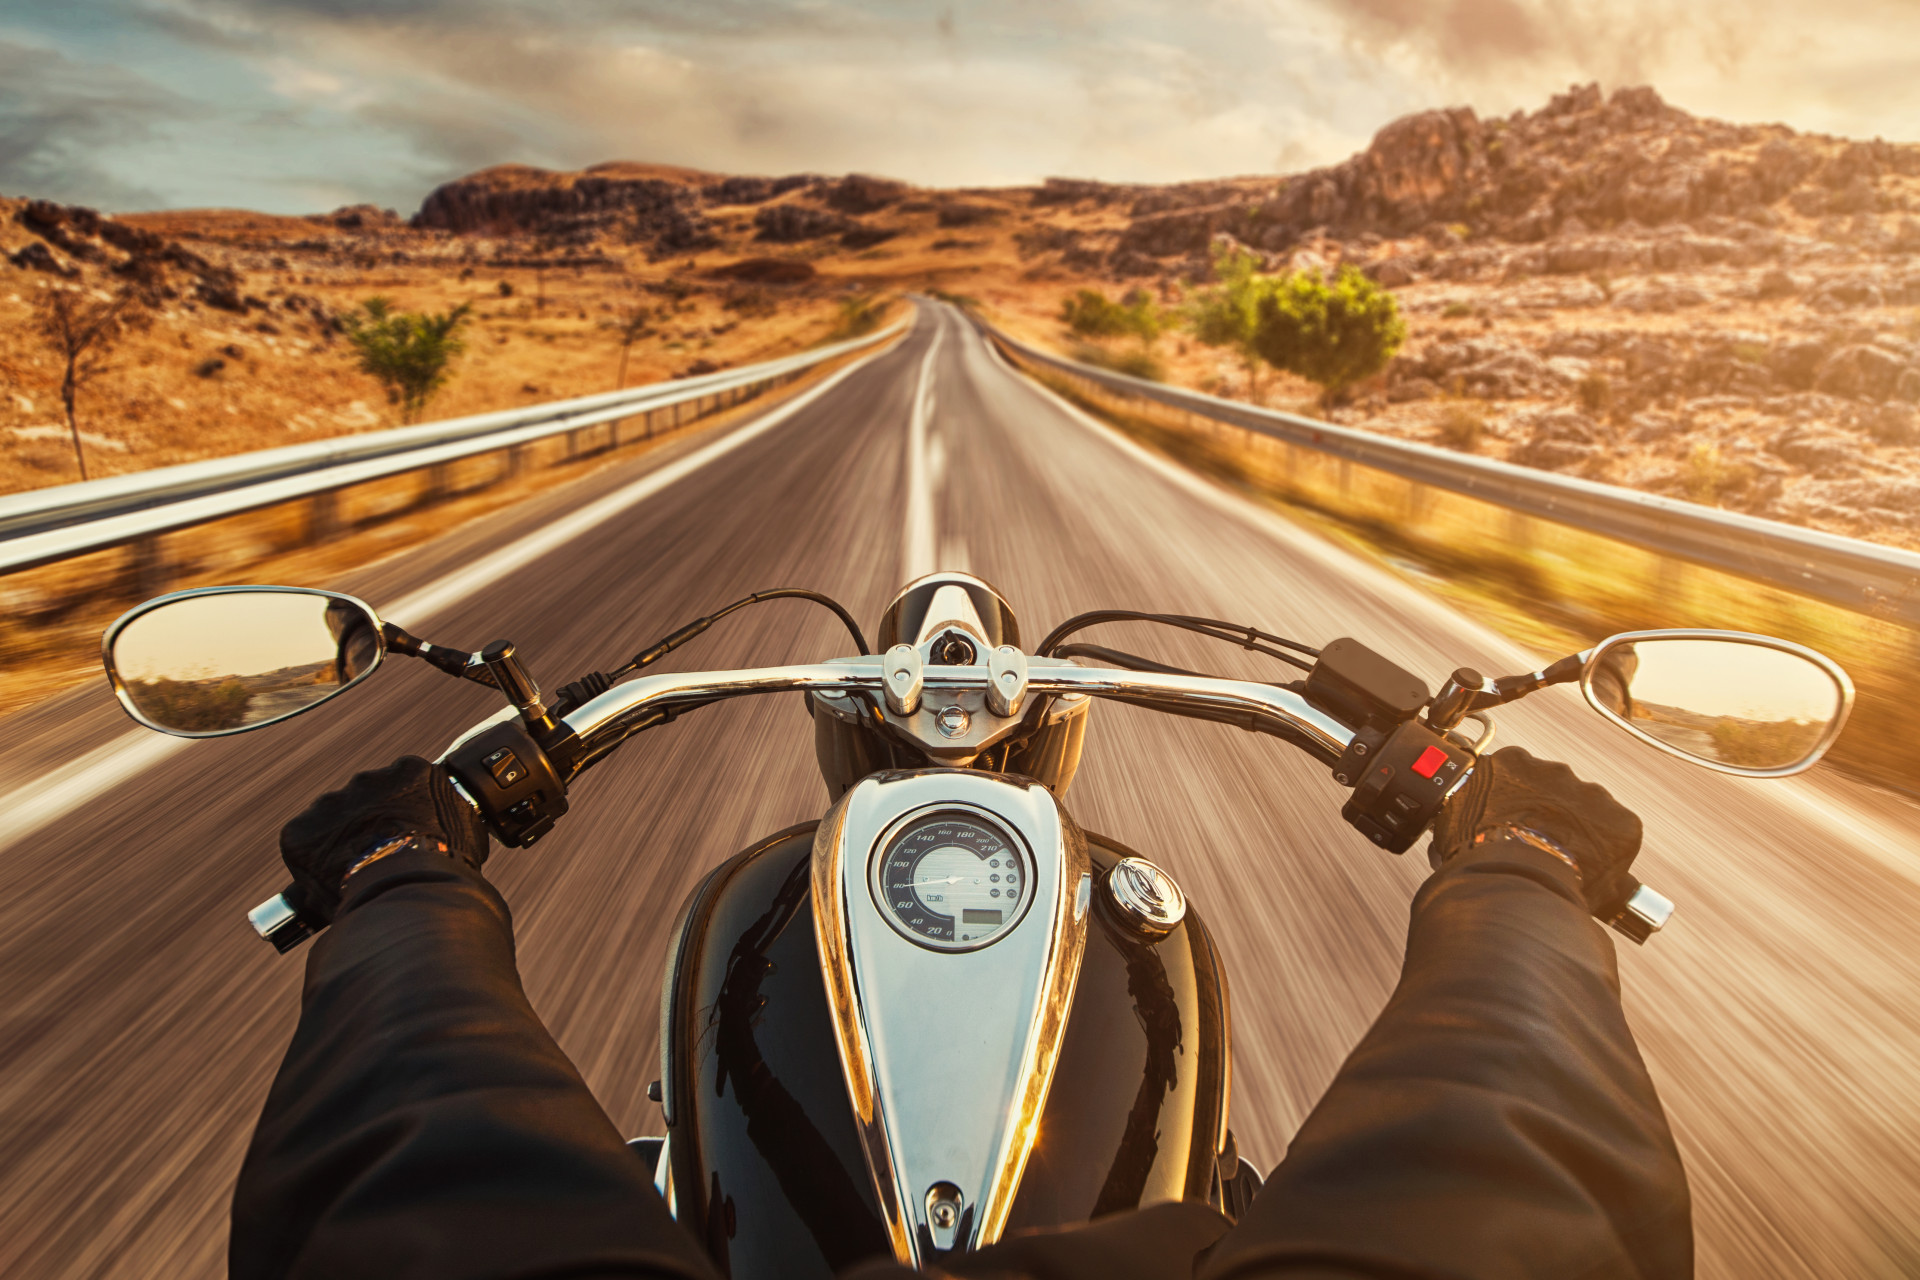 <p>The open road, the wind, and the speed. Riding on two wheels is a synonym of freedom for many. The bottom line is, riding a motorcycle can definitely make any journey much more fun.</p> <p>Get your motor runnin’ and check out these amazing facts about motorcycles!</p><p>You may also like:<a href="https://www.starsinsider.com/n/78055?utm_source=msn.com&utm_medium=display&utm_campaign=referral_description&utm_content=354515v5en-en"> Actresses who have played gender bending roles</a></p>